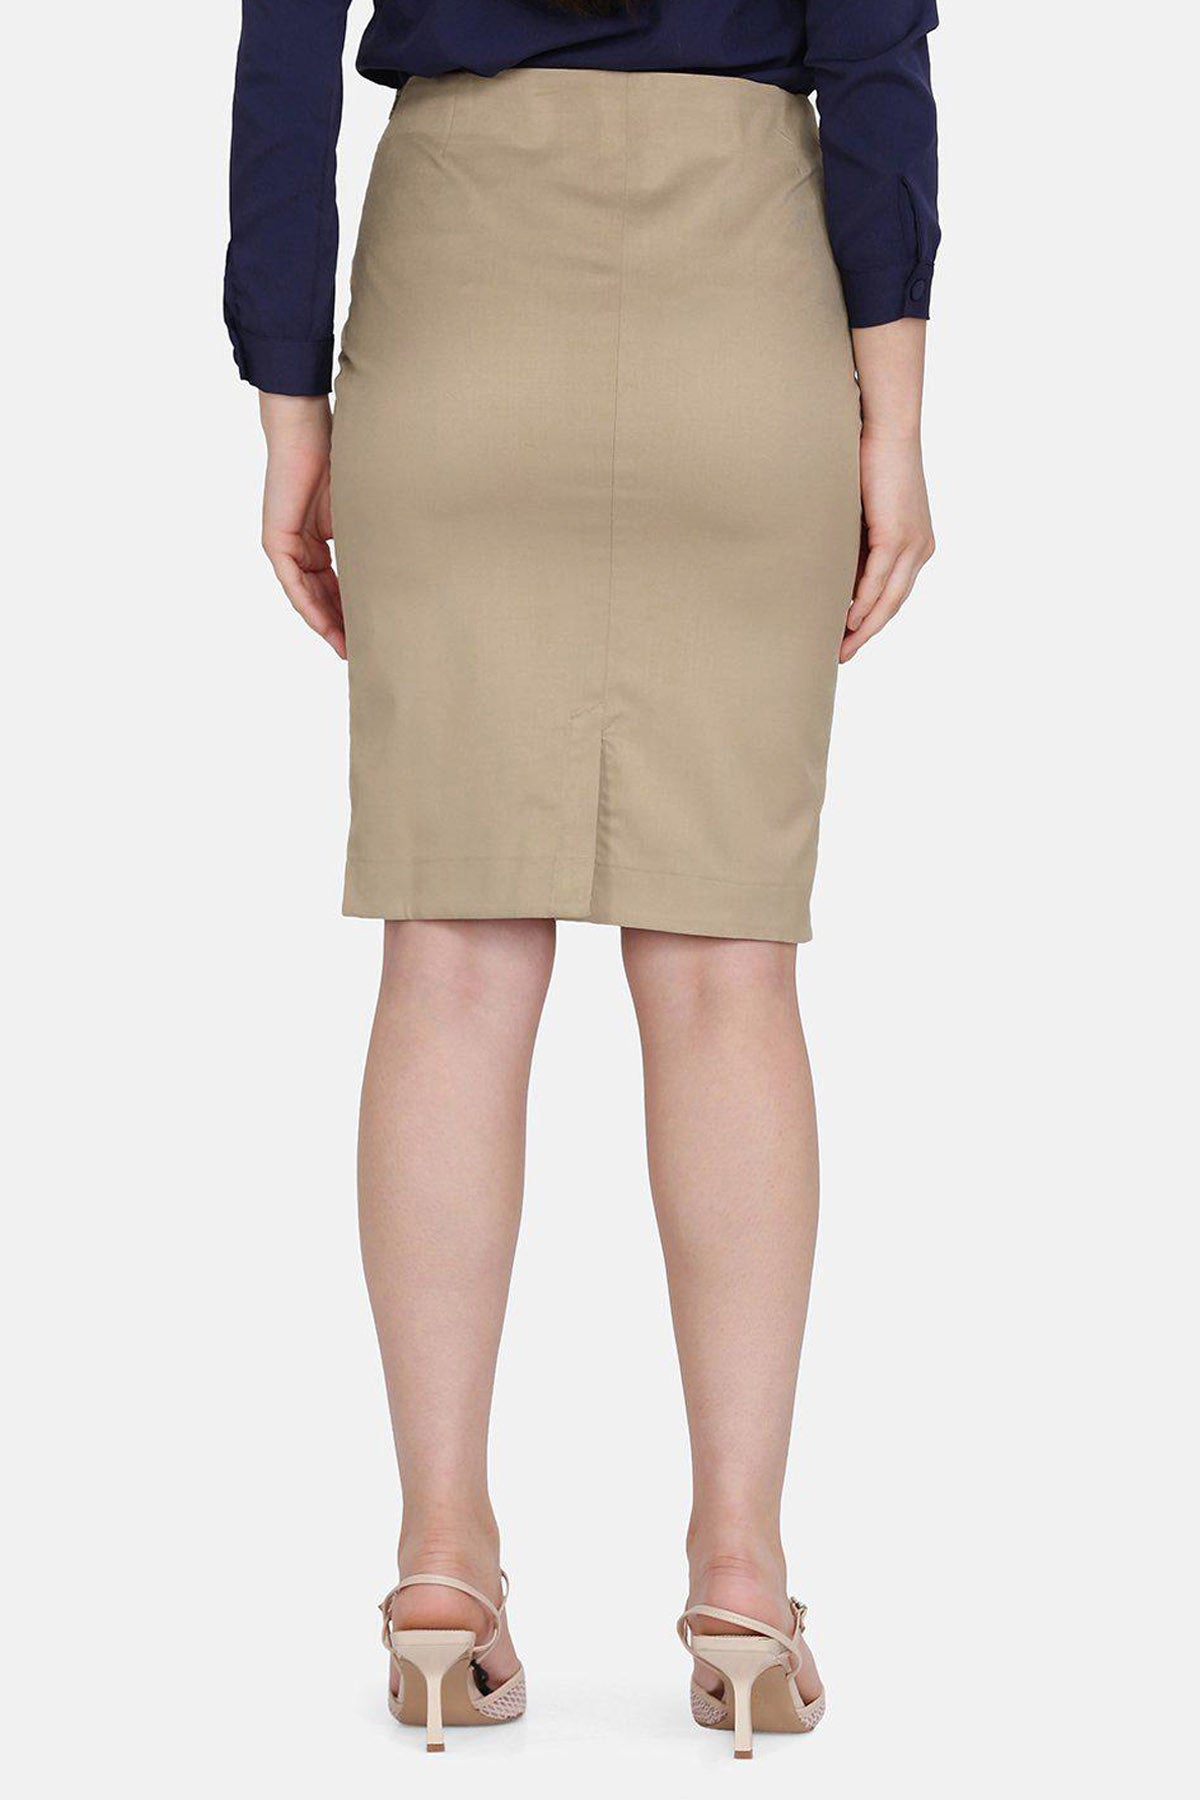 Beige Poly Cotton Skirt